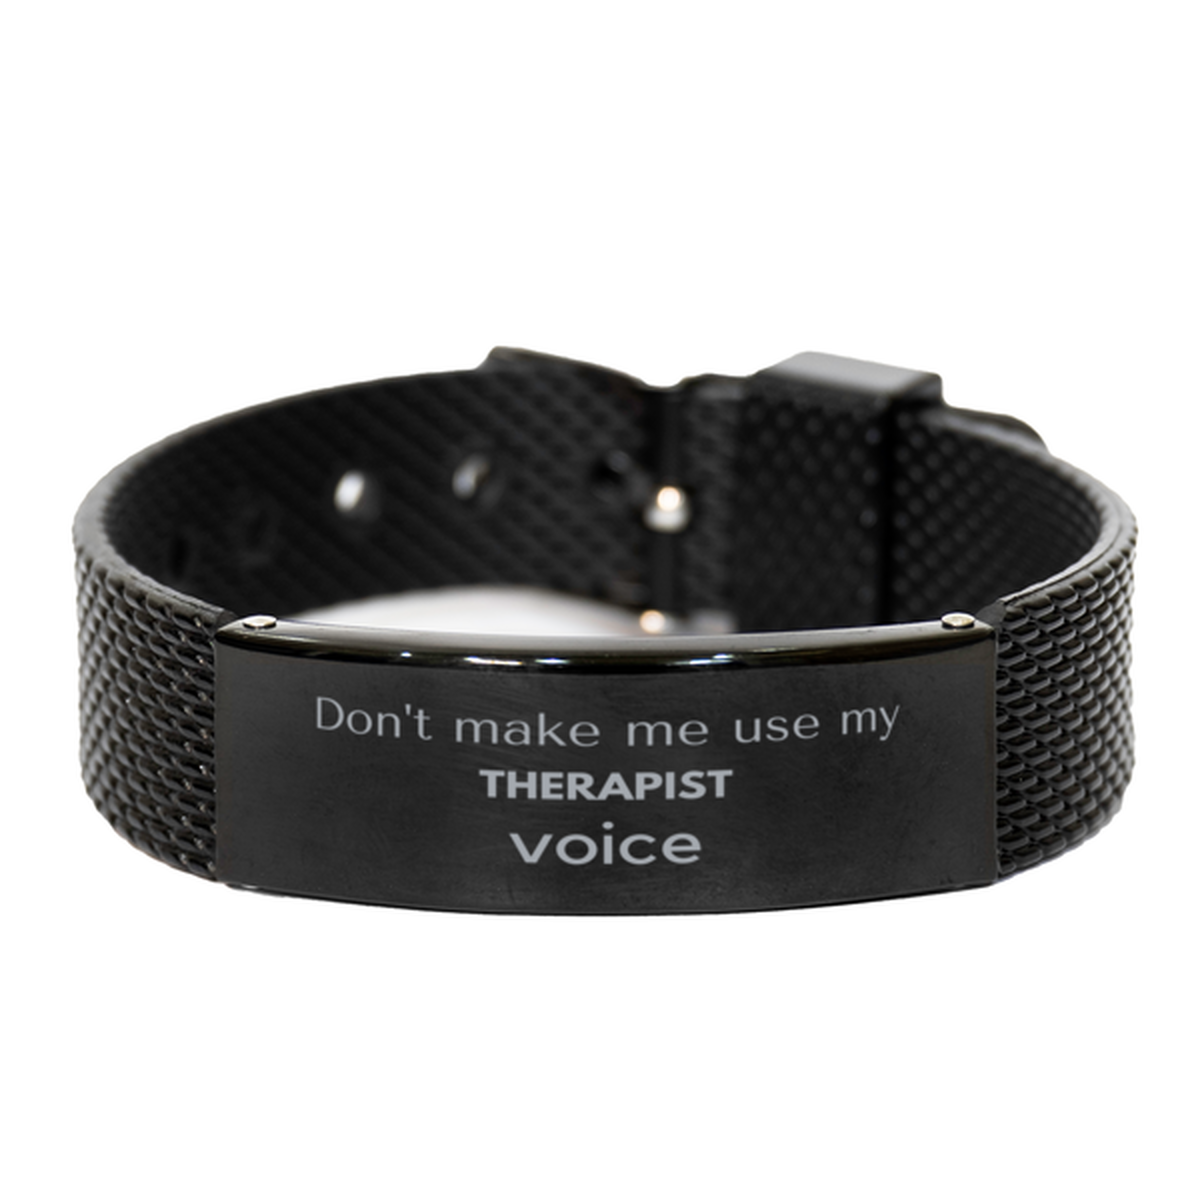 Don't make me use my Therapist voice, Sarcasm Therapist Gifts, Christmas Therapist Black Shark Mesh Bracelet Birthday Unique Gifts For Therapist Coworkers, Men, Women, Colleague, Friends